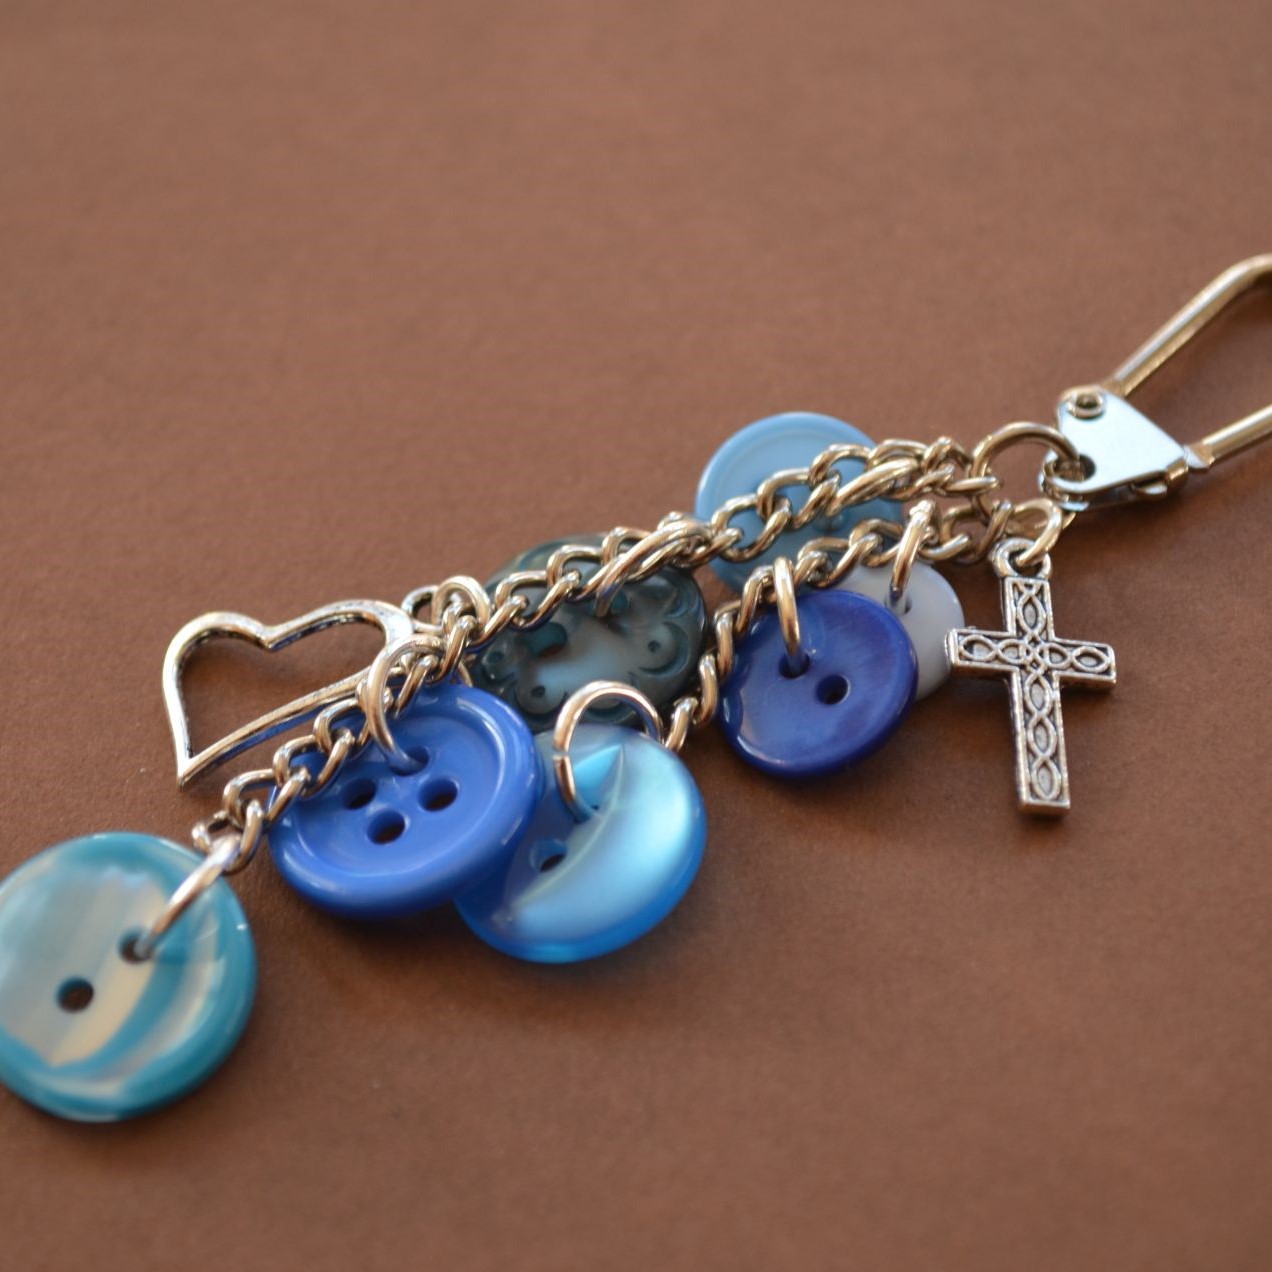 Religious Cross Wee Cluster Bag Charm Keyring